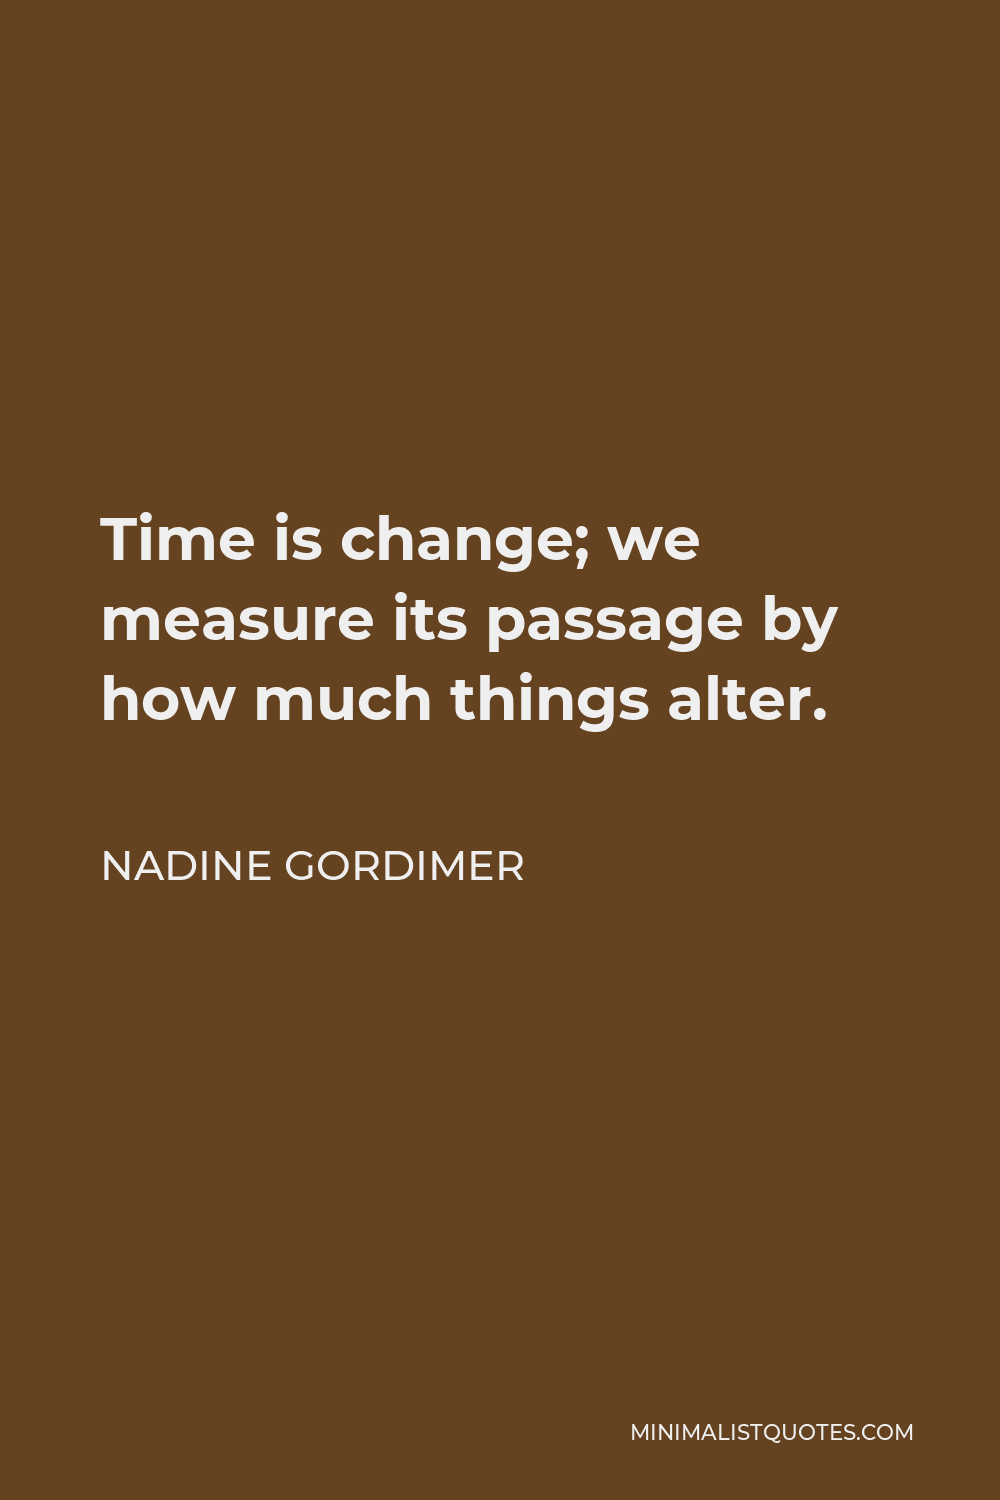 Nadine Gordimer Quote - Time is change; we measure its passage by how much things alter.